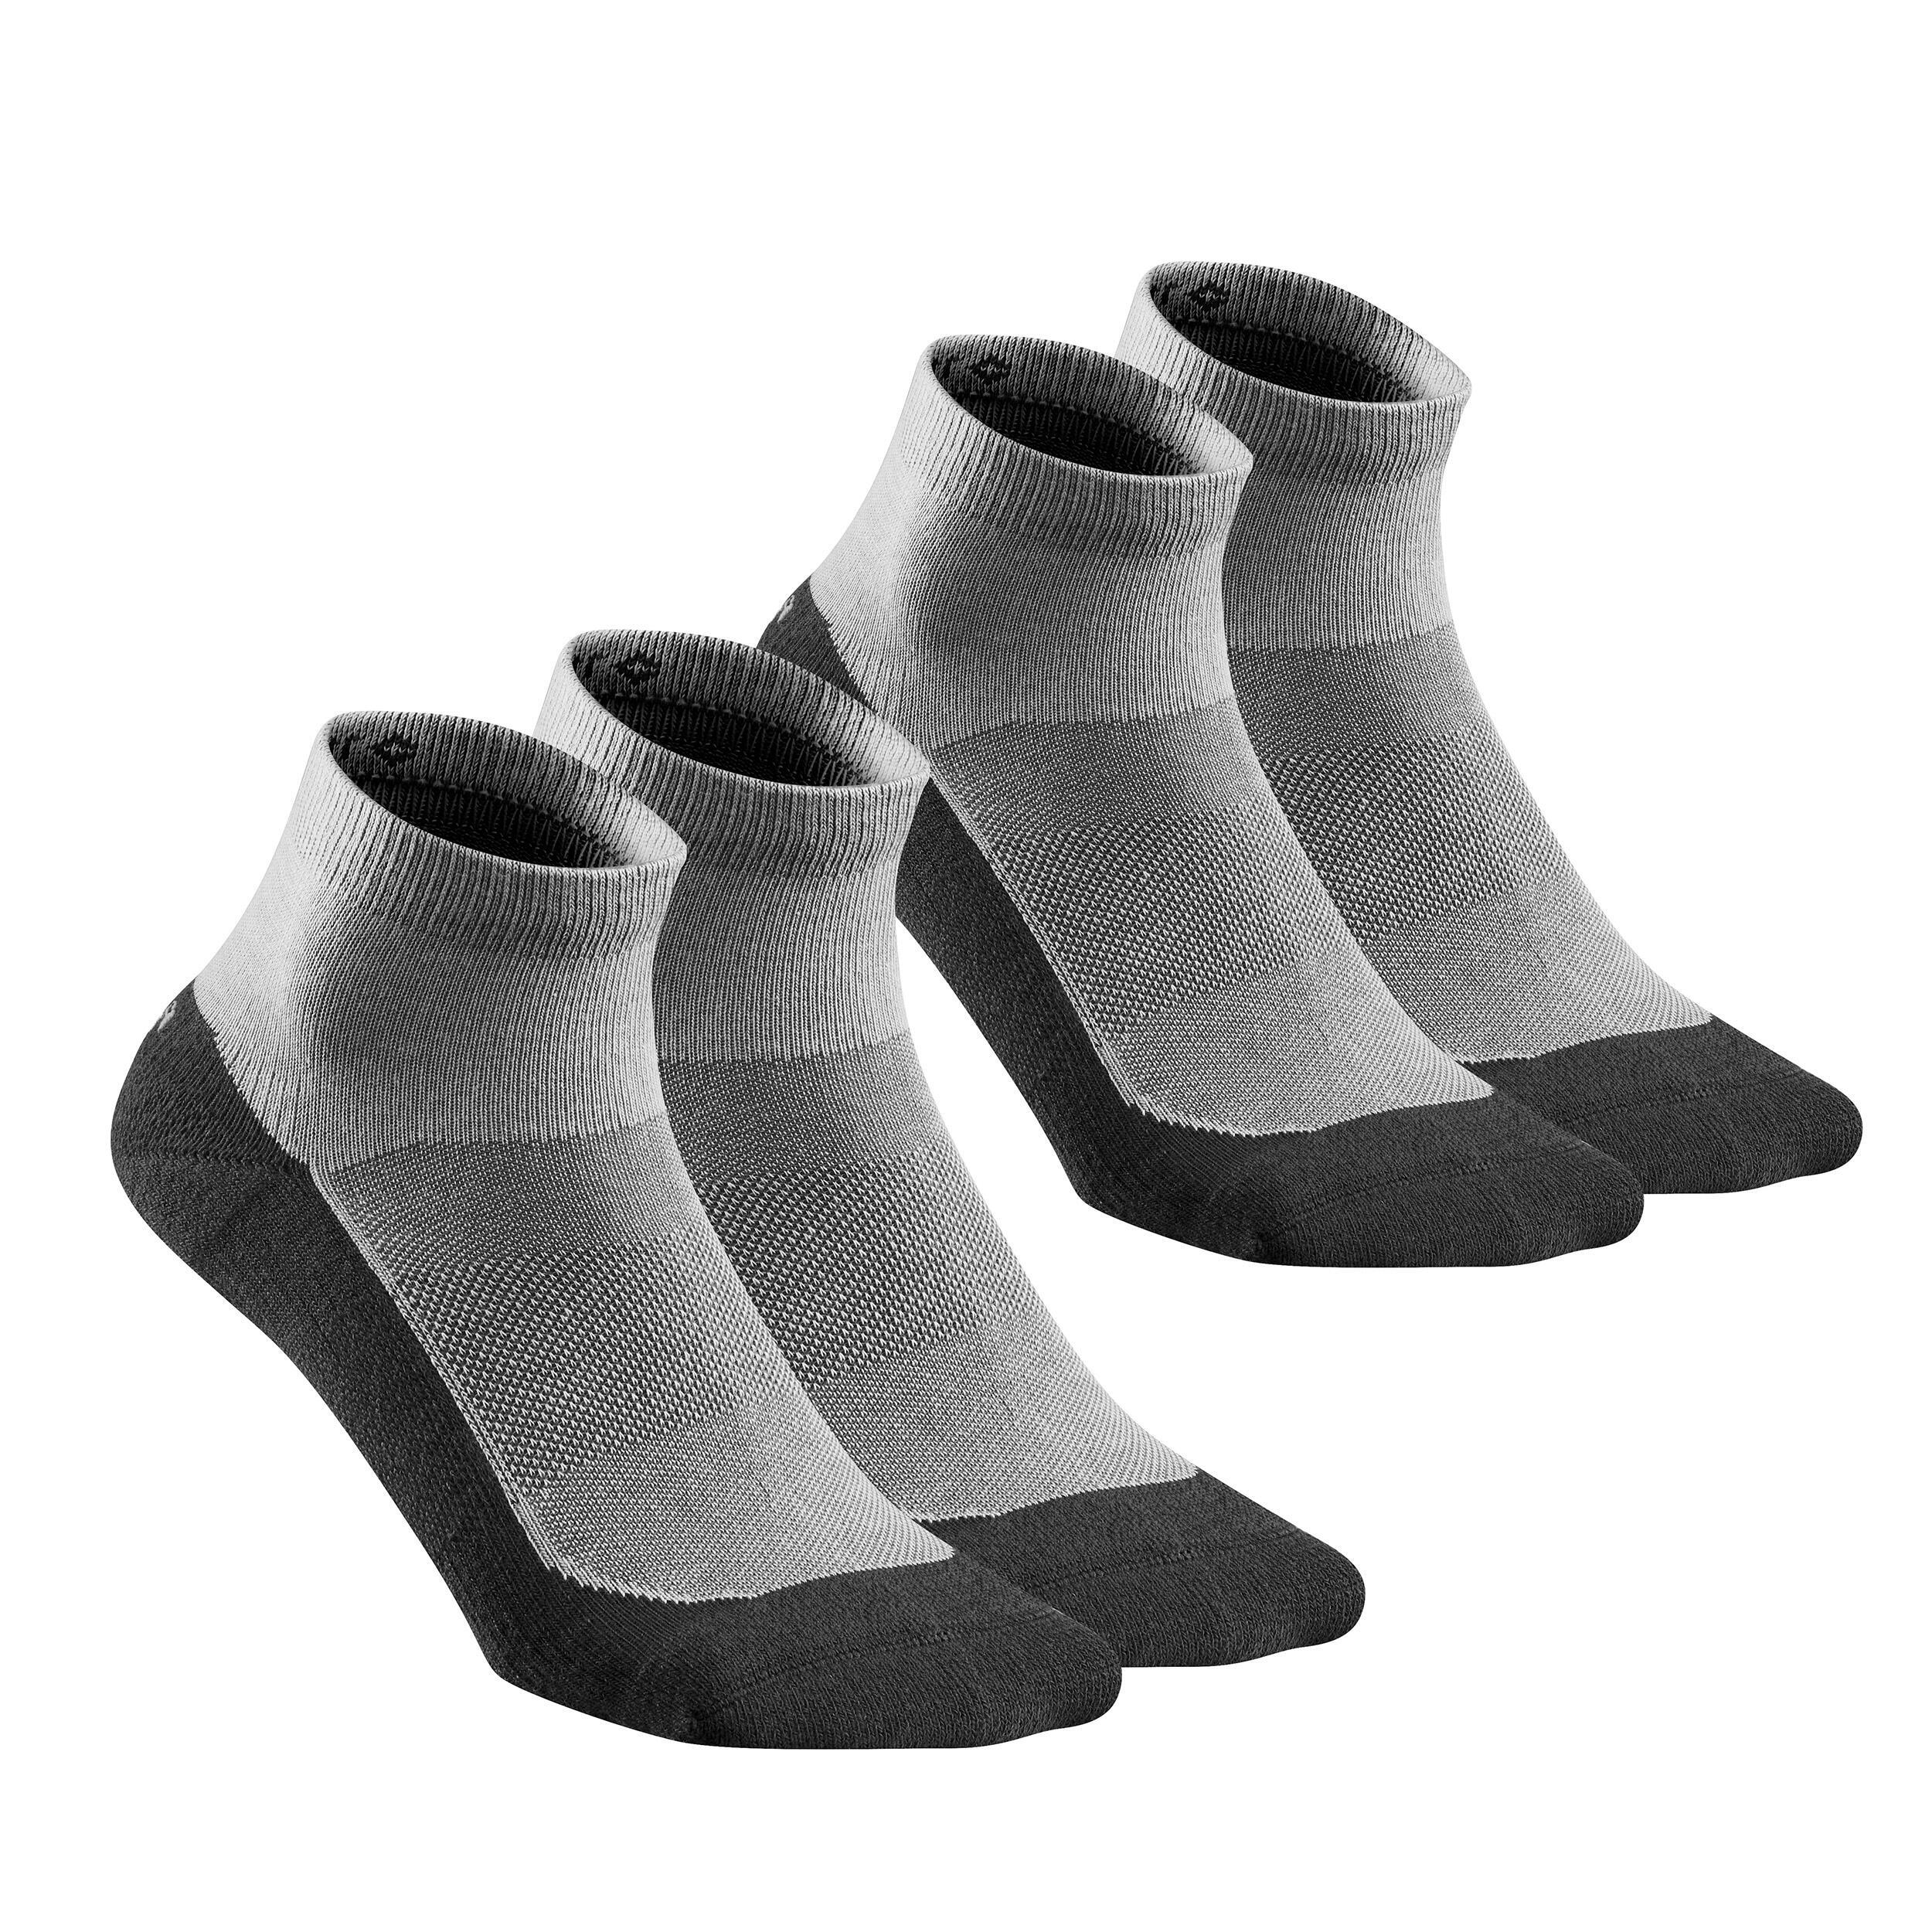 QUECHUA Sock Hike 50 Mid  - Pack of 2 pairs - Grey